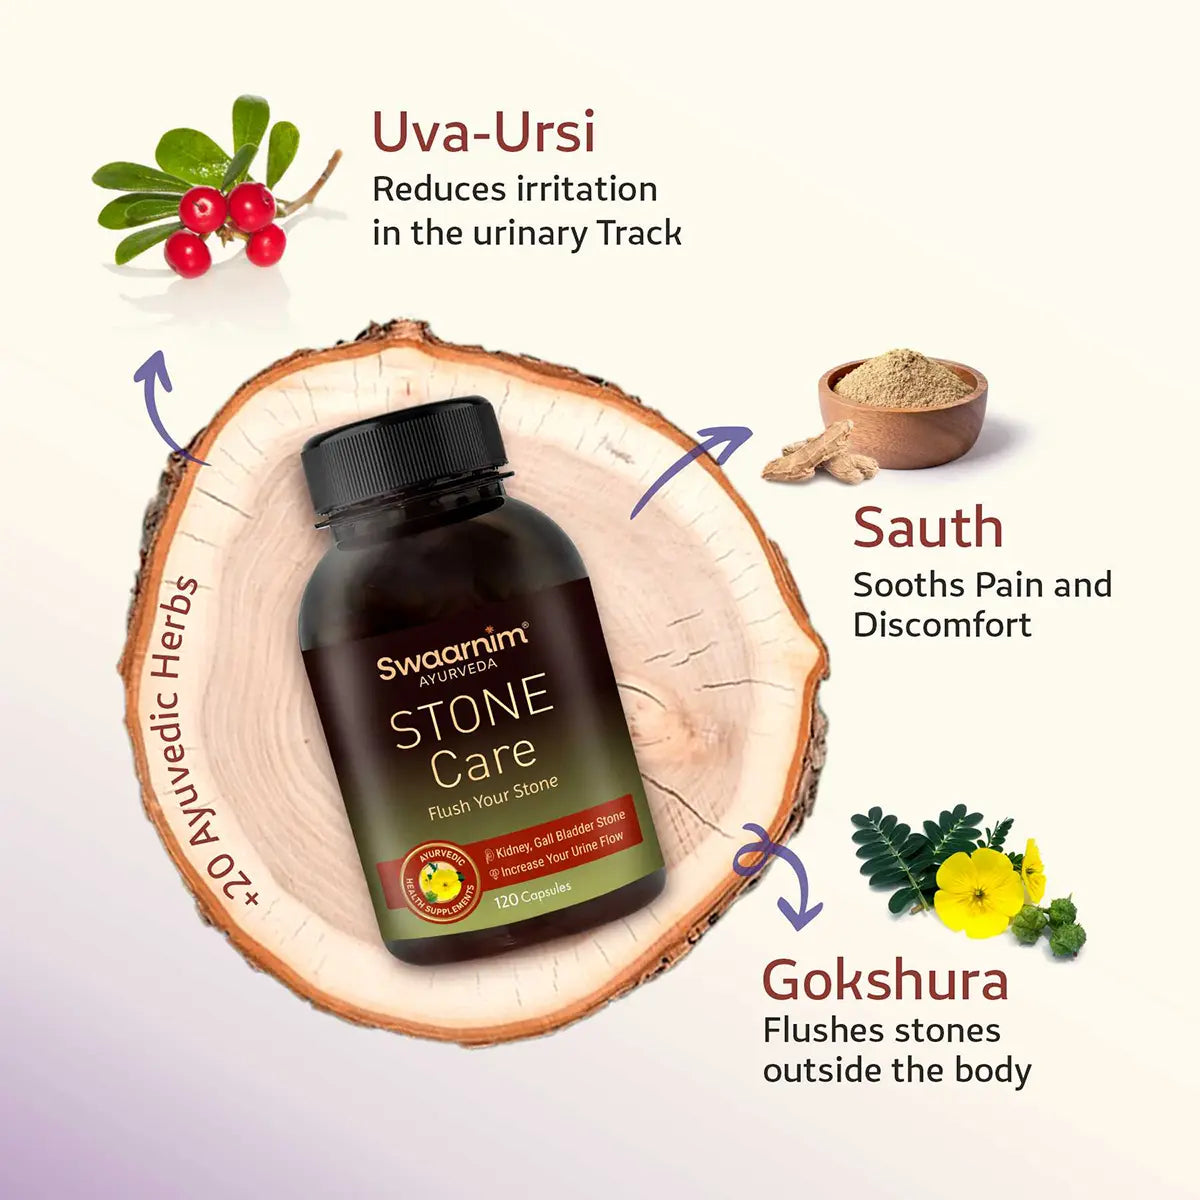 Swaarnim Stone Care | Complete relief from Kidney Stone Improvement in Urinary Tract Health Reduces Inflammation